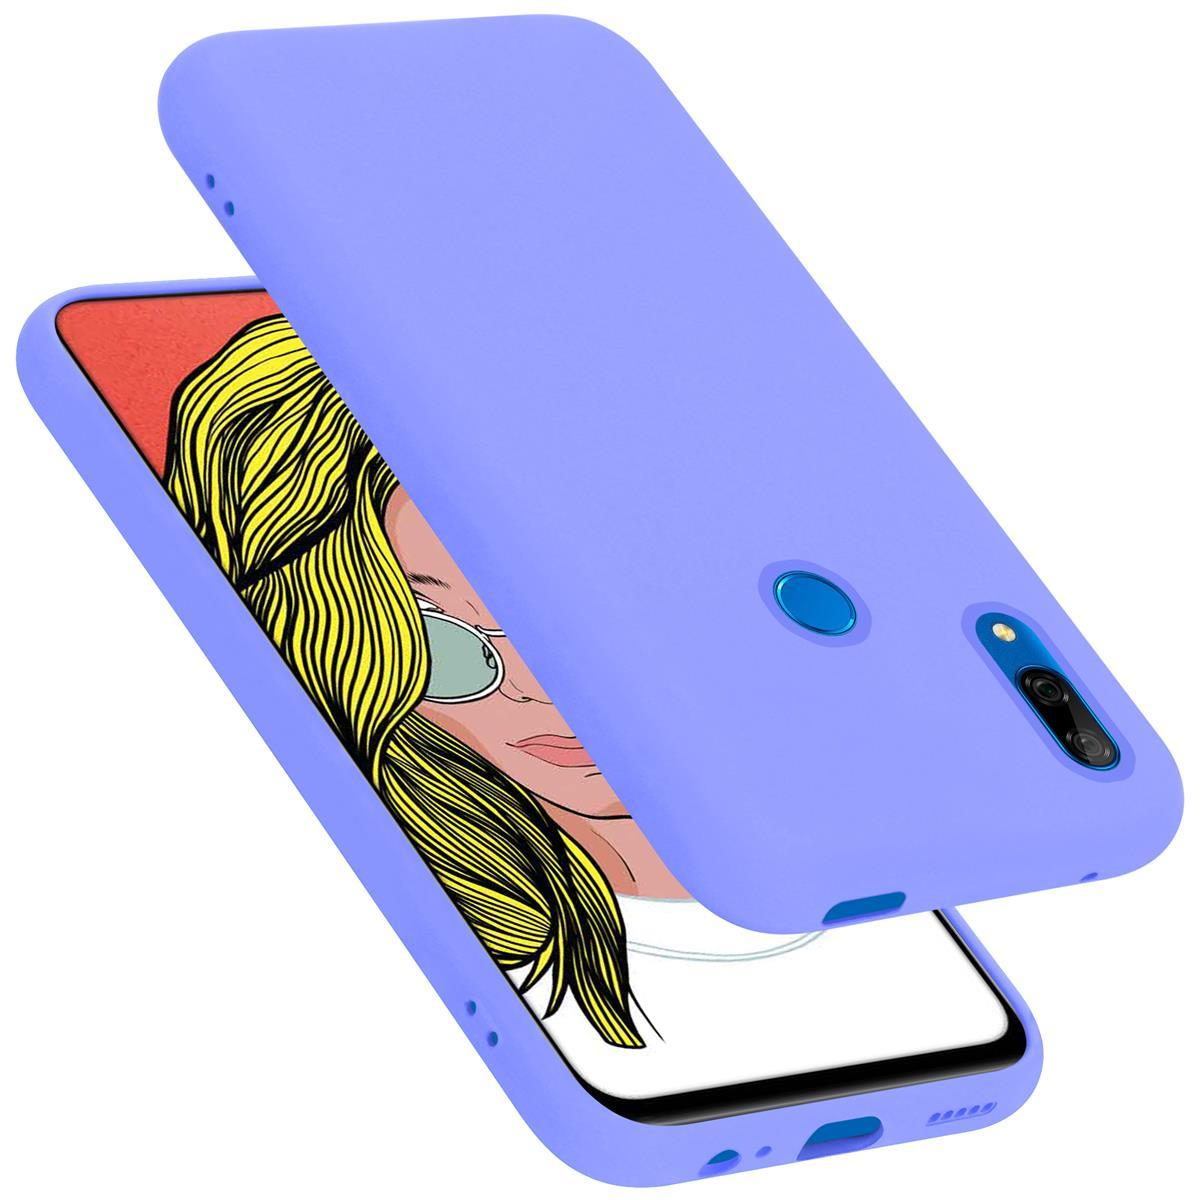 LITE P LIQUID LILA Silicone im 2019, Backcover, CADORABO Huawei Liquid / Style, SMART Case HELL 10 Hülle Honor,